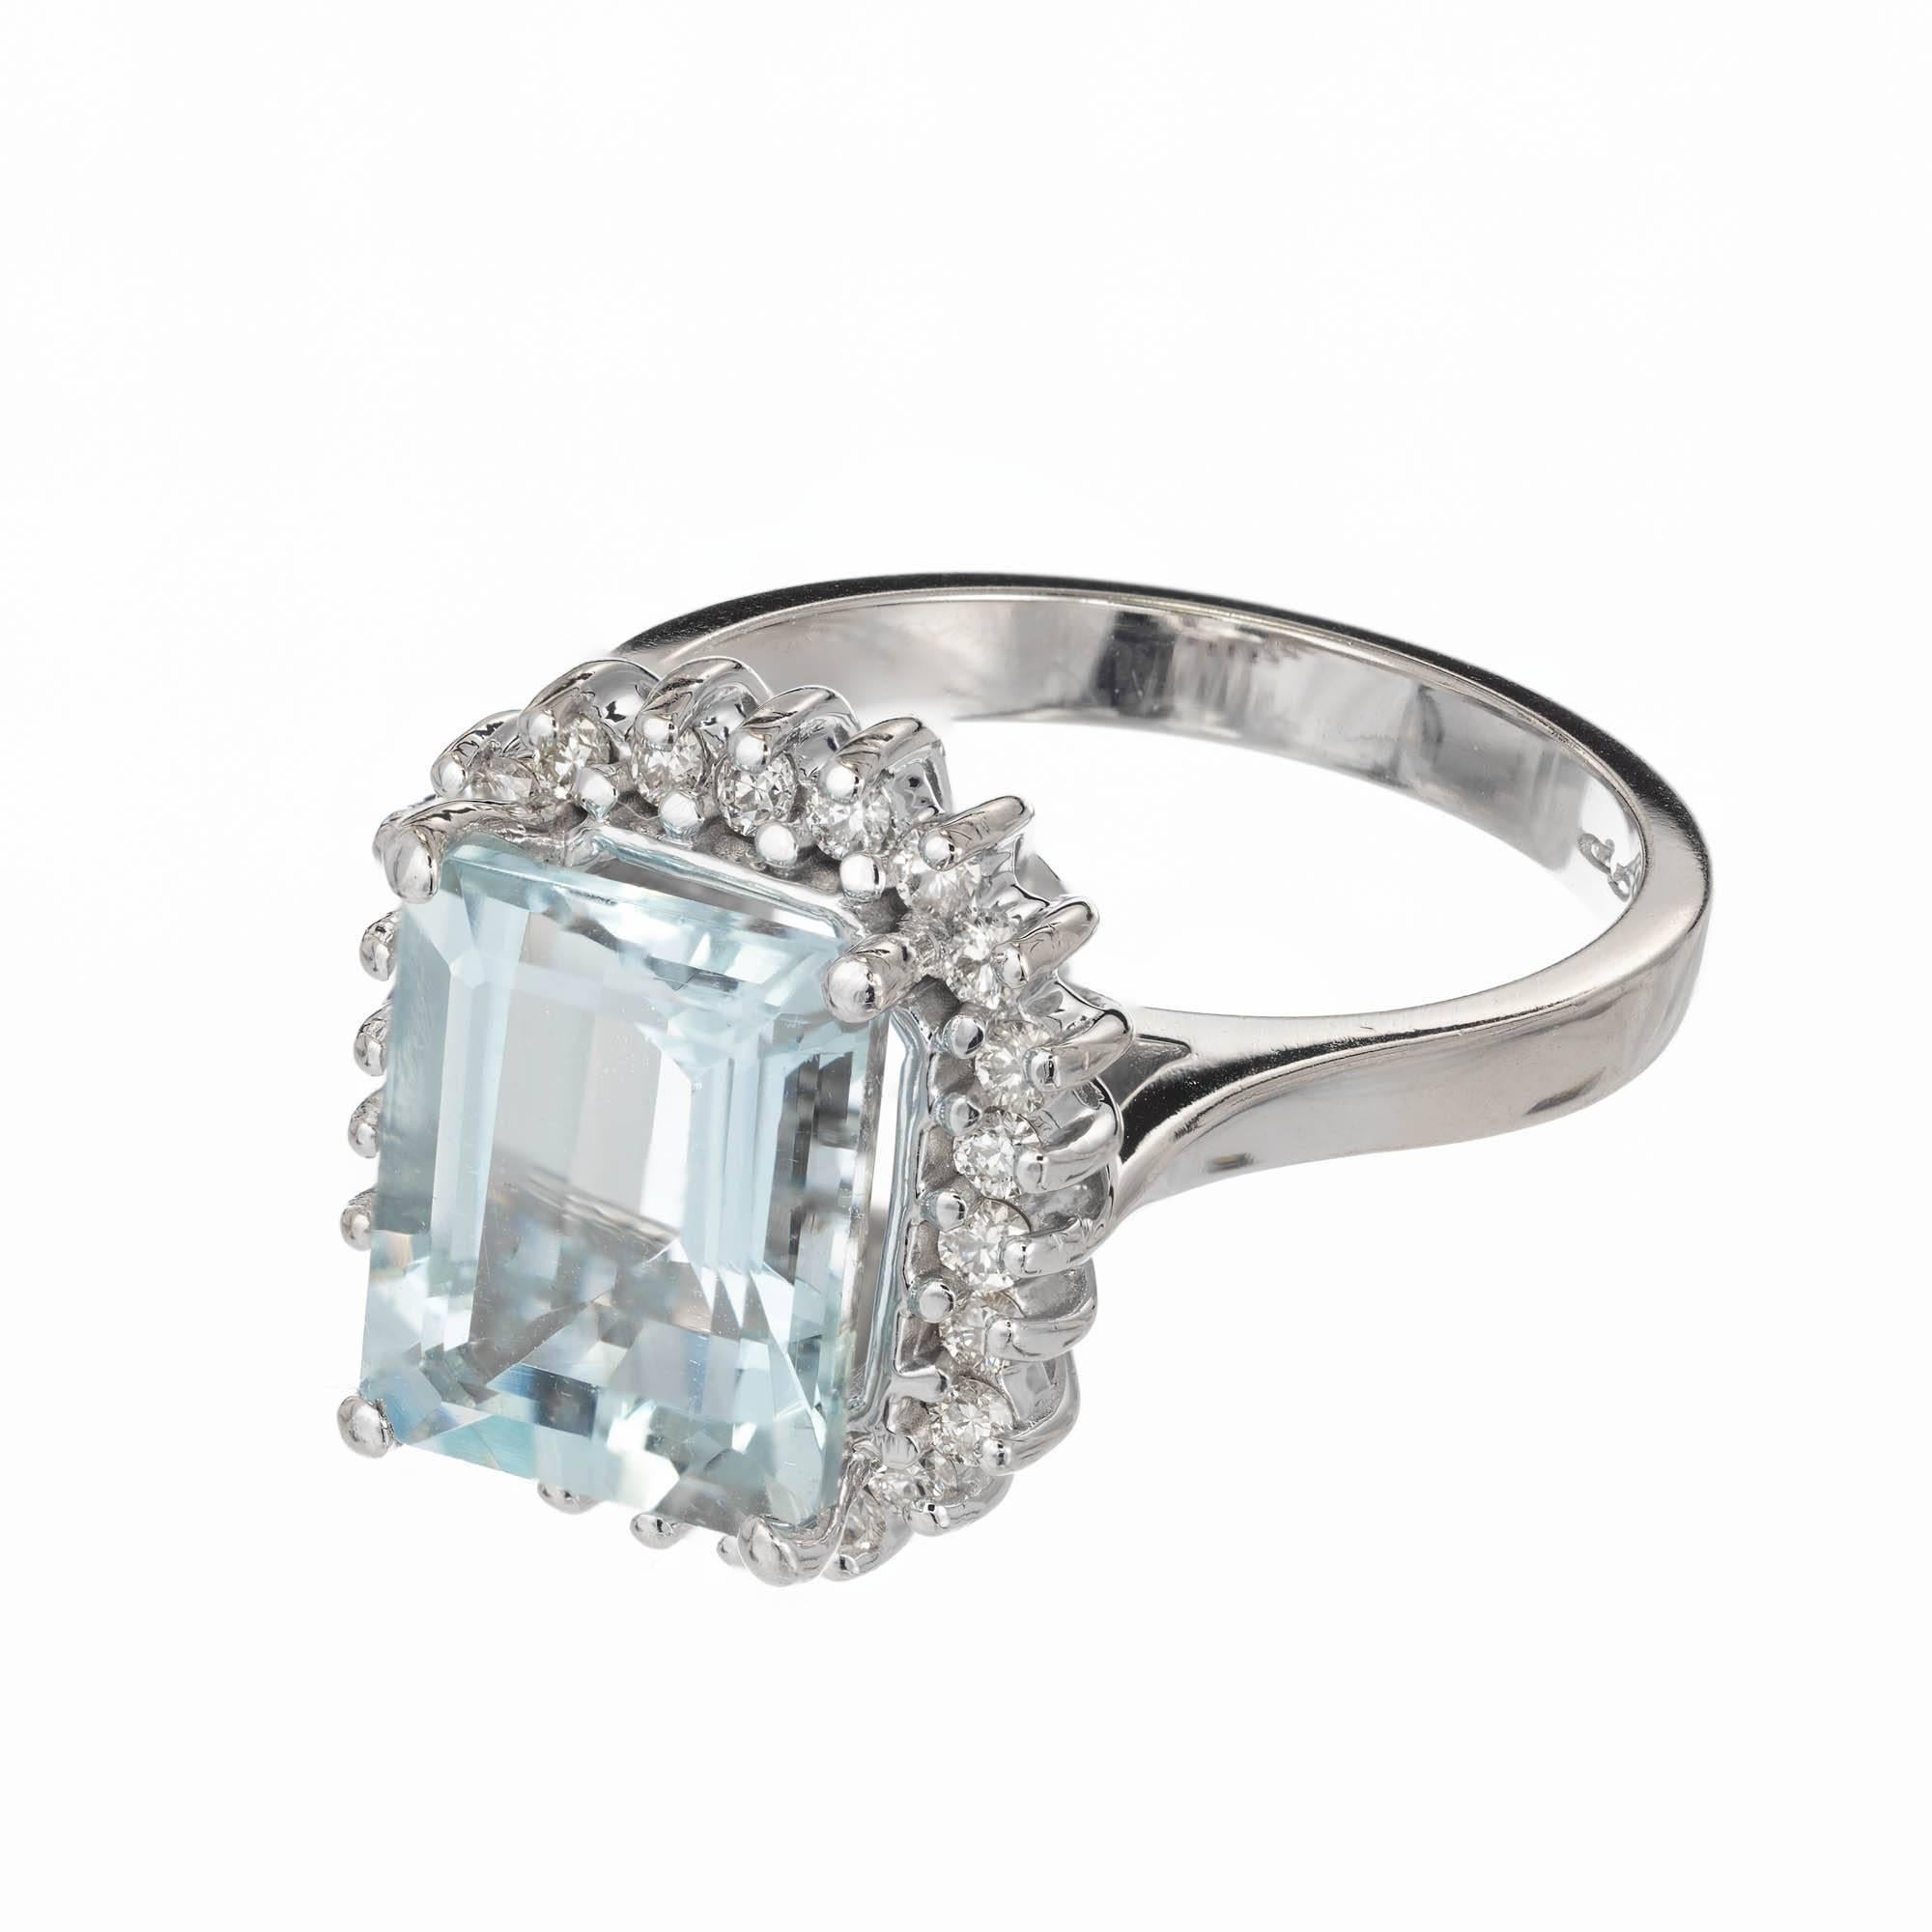 Bright natural untreated slightly greenish blue natural Aqua and diamond halo cocktail ring. In a 14k white gold setting surrounded by a halo of diamonds.

1 Emerald cut bright greenish blue Aqua, approx. total weight 3.00cts, VS, 10.2 x 8.2mm
24